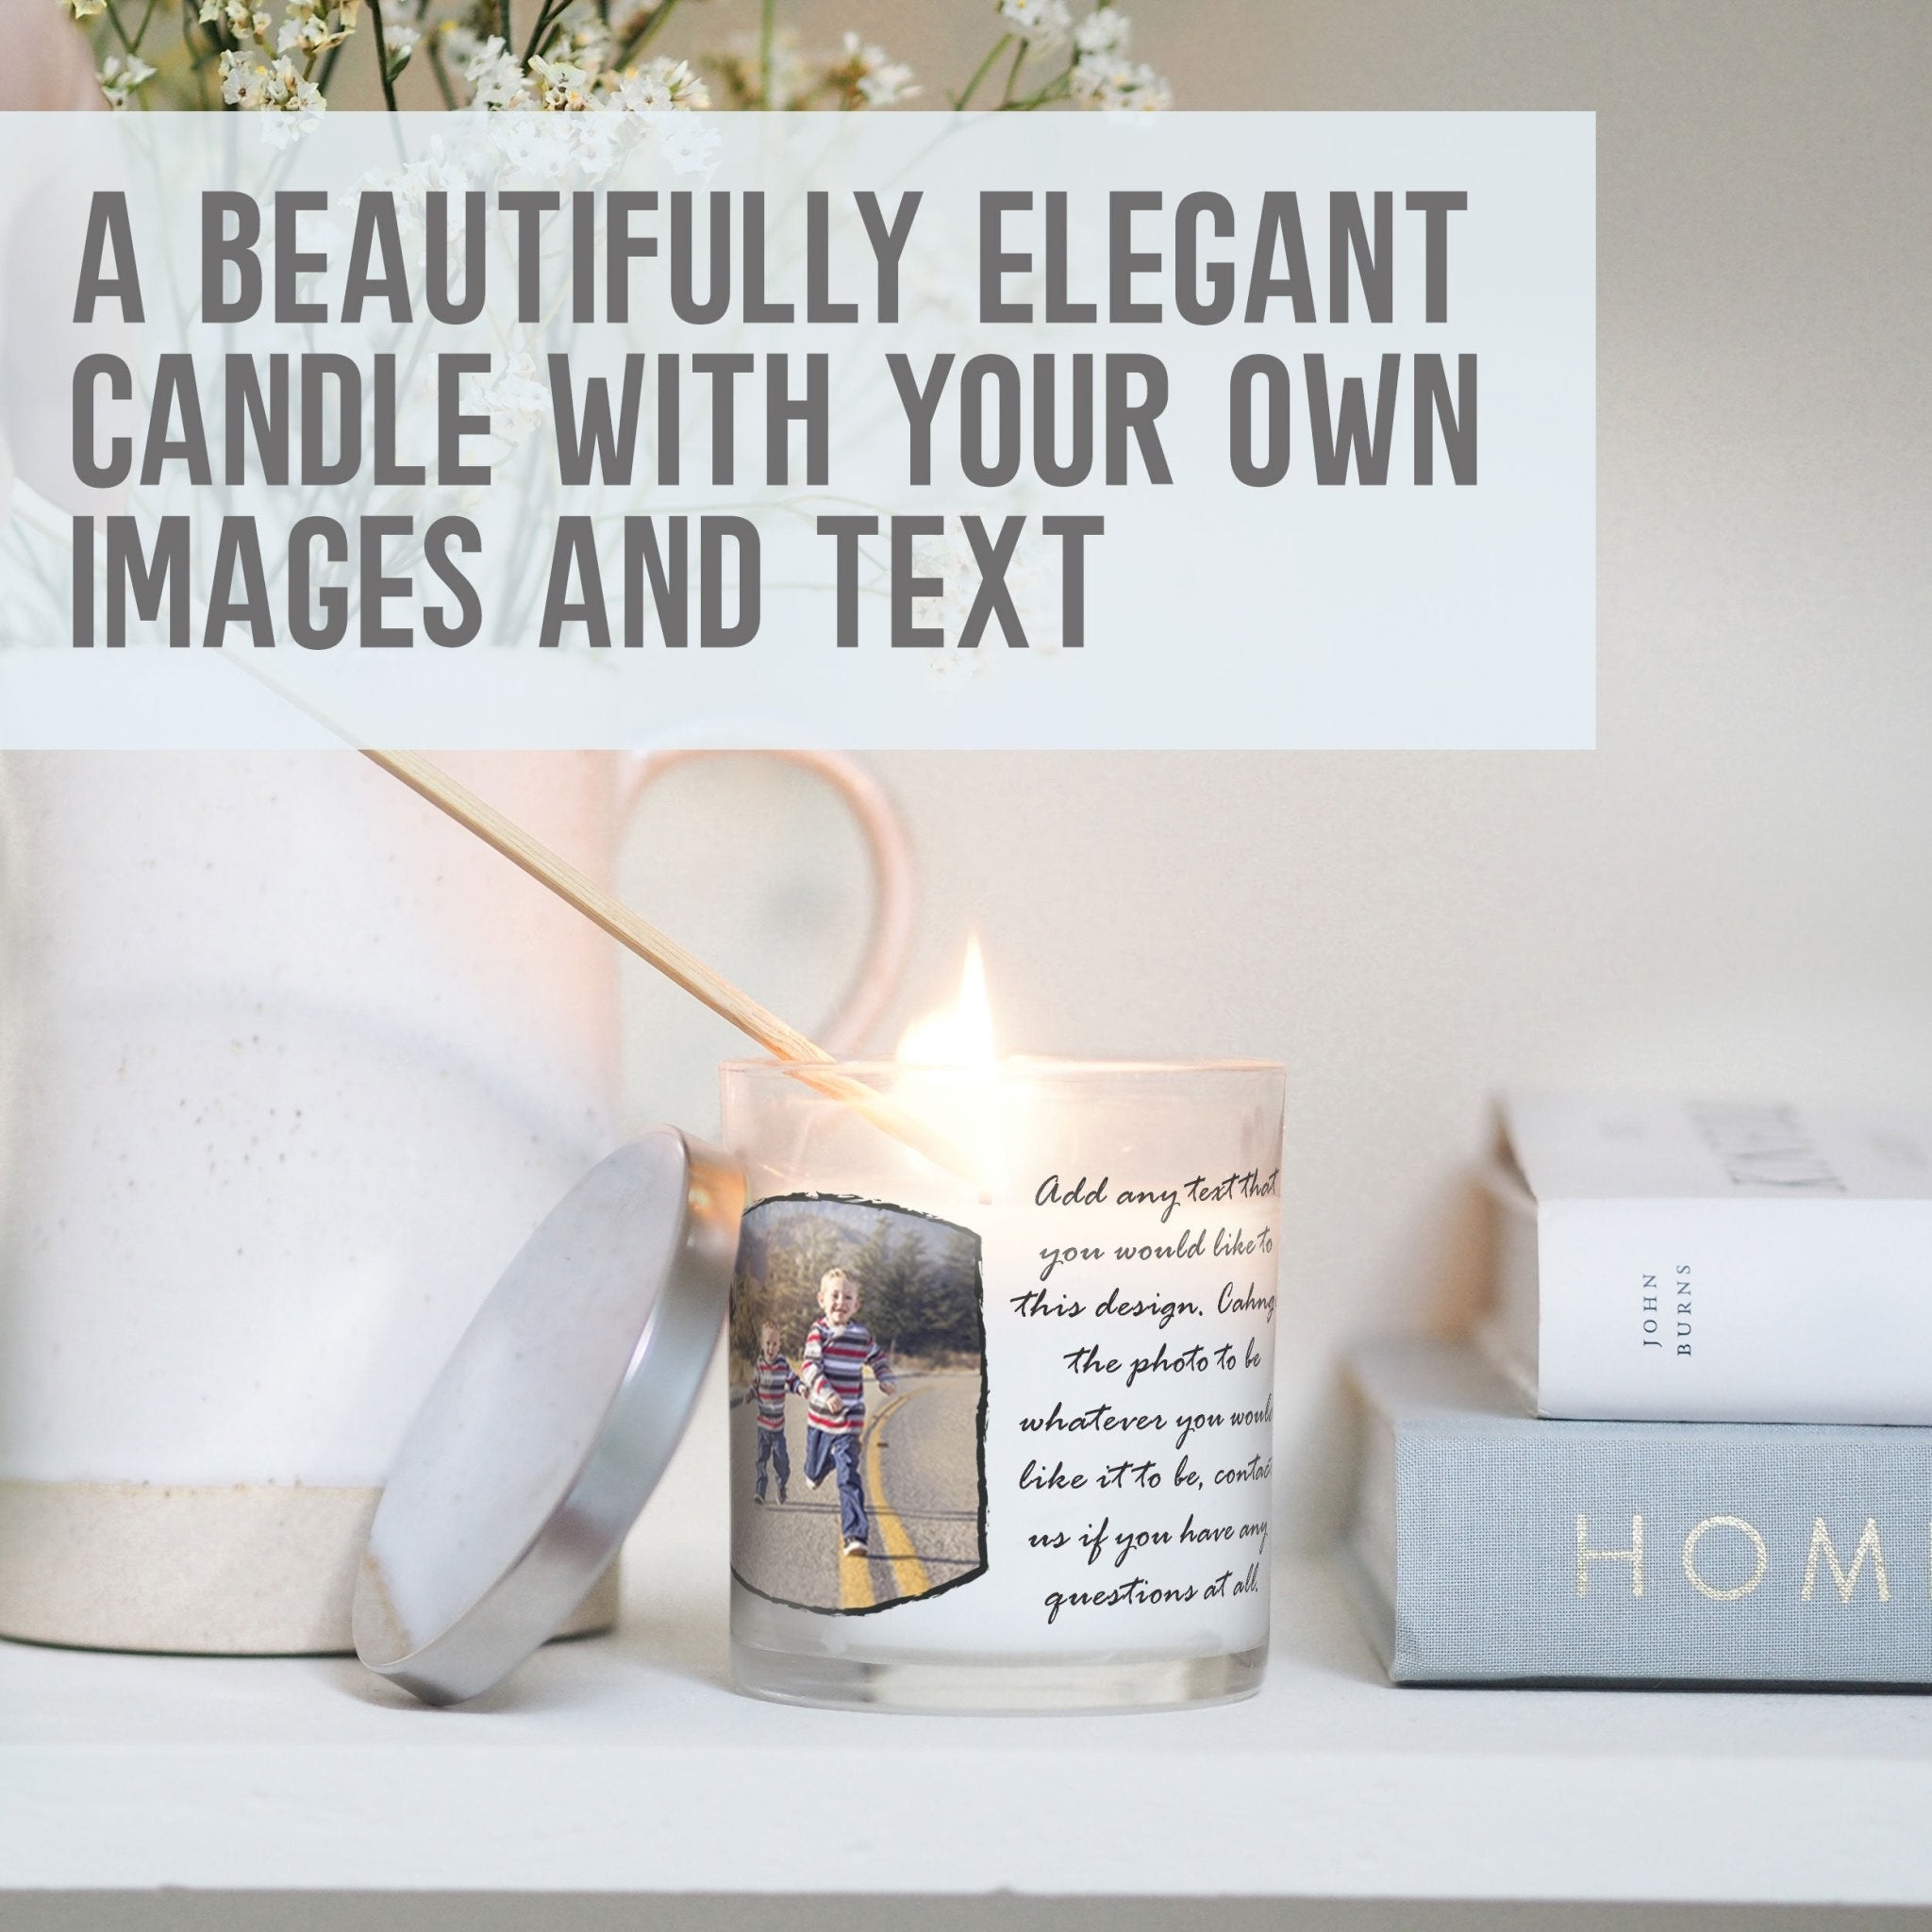 Big Brother Custom Photo Glass Candleholder | Unique Family Gift Ideas for Bro | Personalised Votive Glass with Picture | Home Decor Present Candleholder - Unique Prints